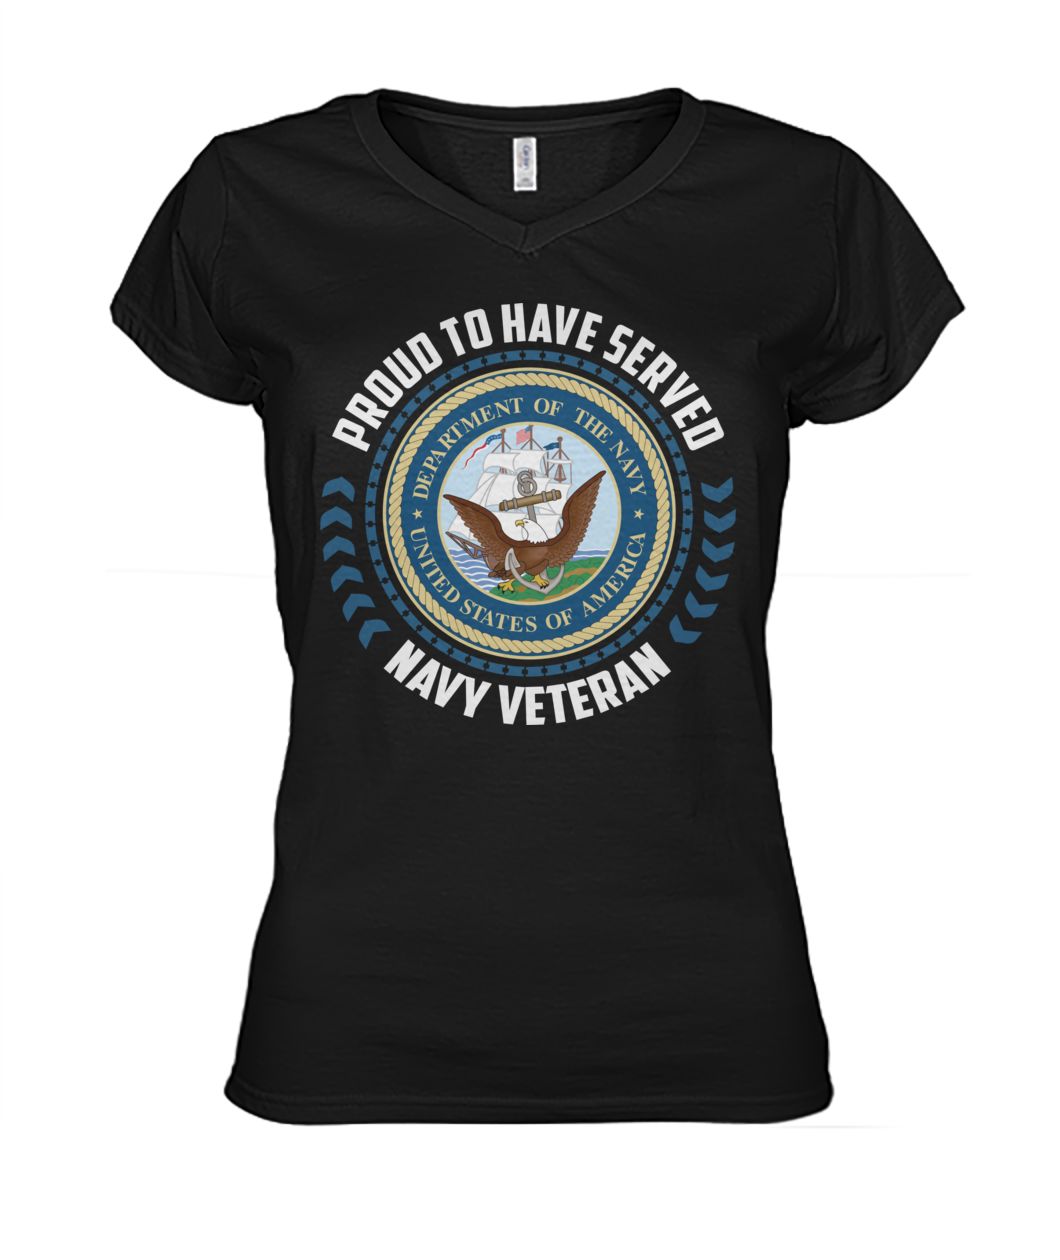 Proud to have served navy veteran women's v-neck